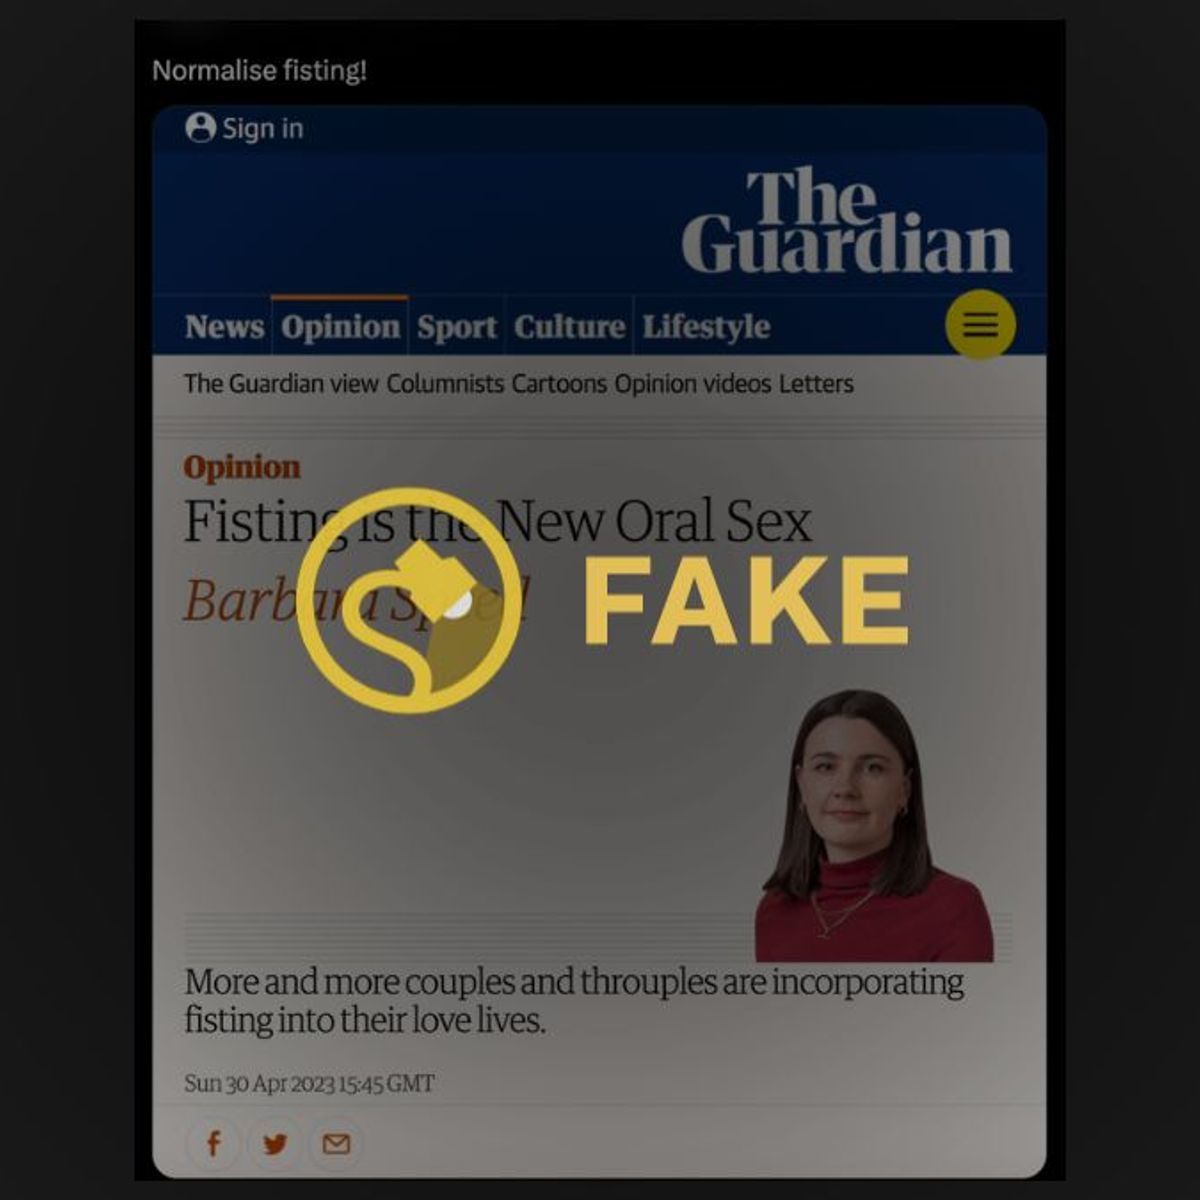 Is This a Real Guardian Story Titled Fisting Is the New Oral Sex? Snopes image